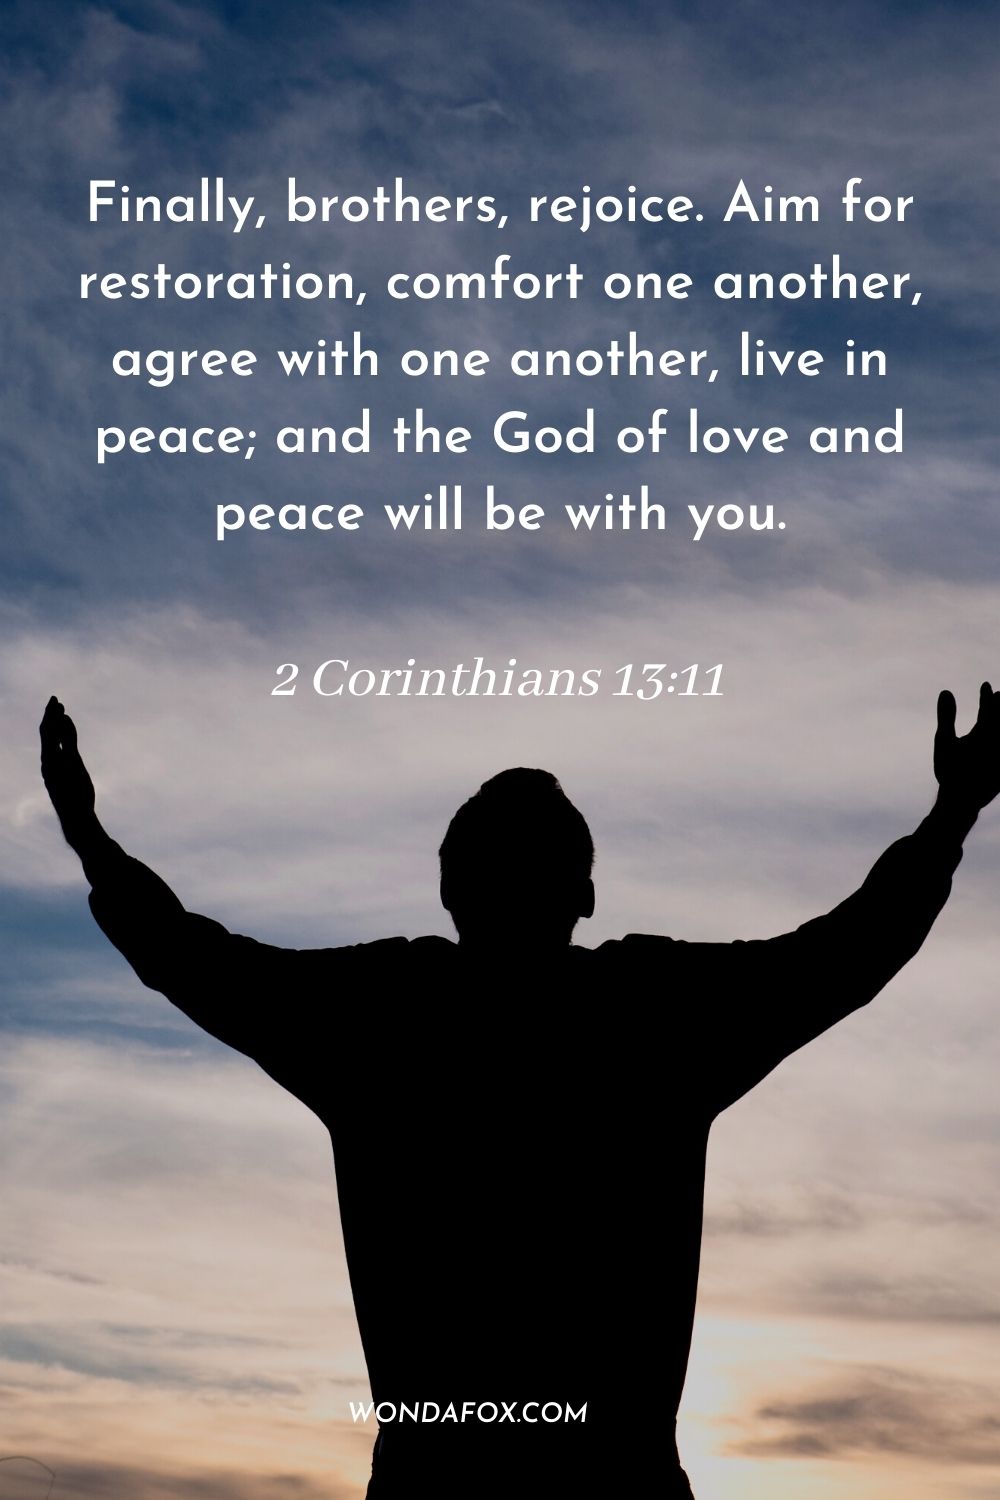 Finally, brothers, rejoice. Aim for restoration, comfort one another, agree with one another, live in peace; and the God of love and peace will be with you. 2 Corinthians 13:11